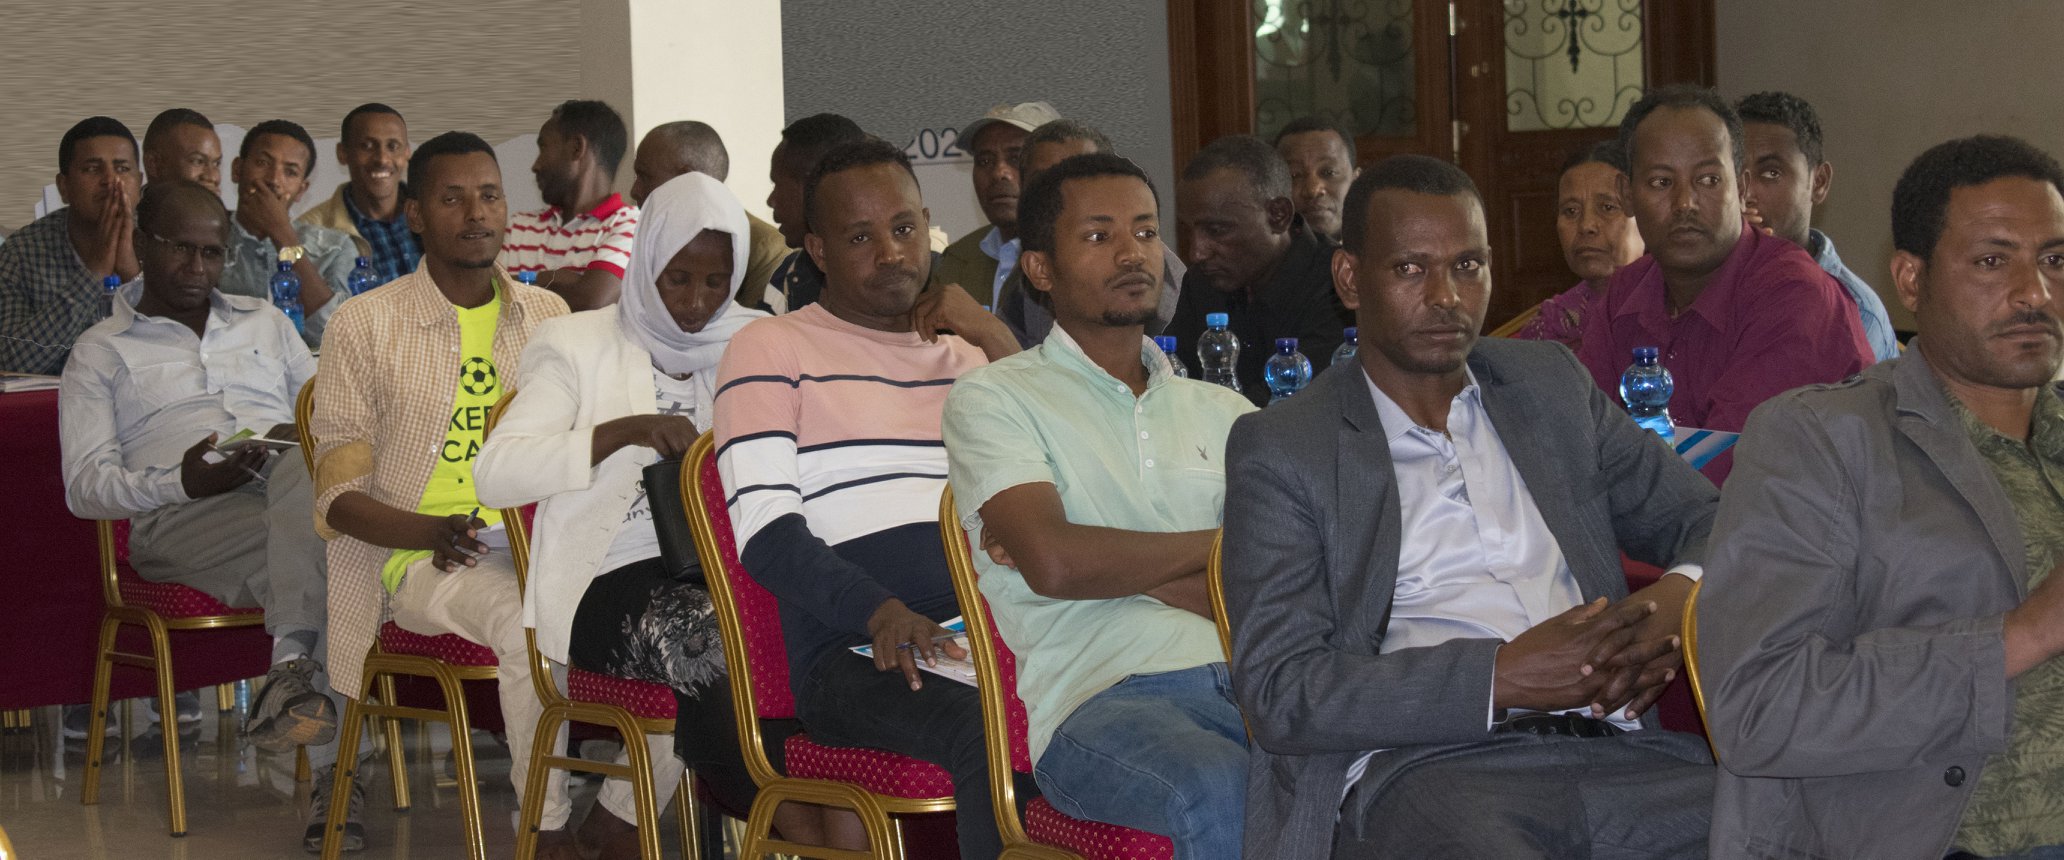 Human Rights Training for Prosecutors and Prison Officials in Ethiopia